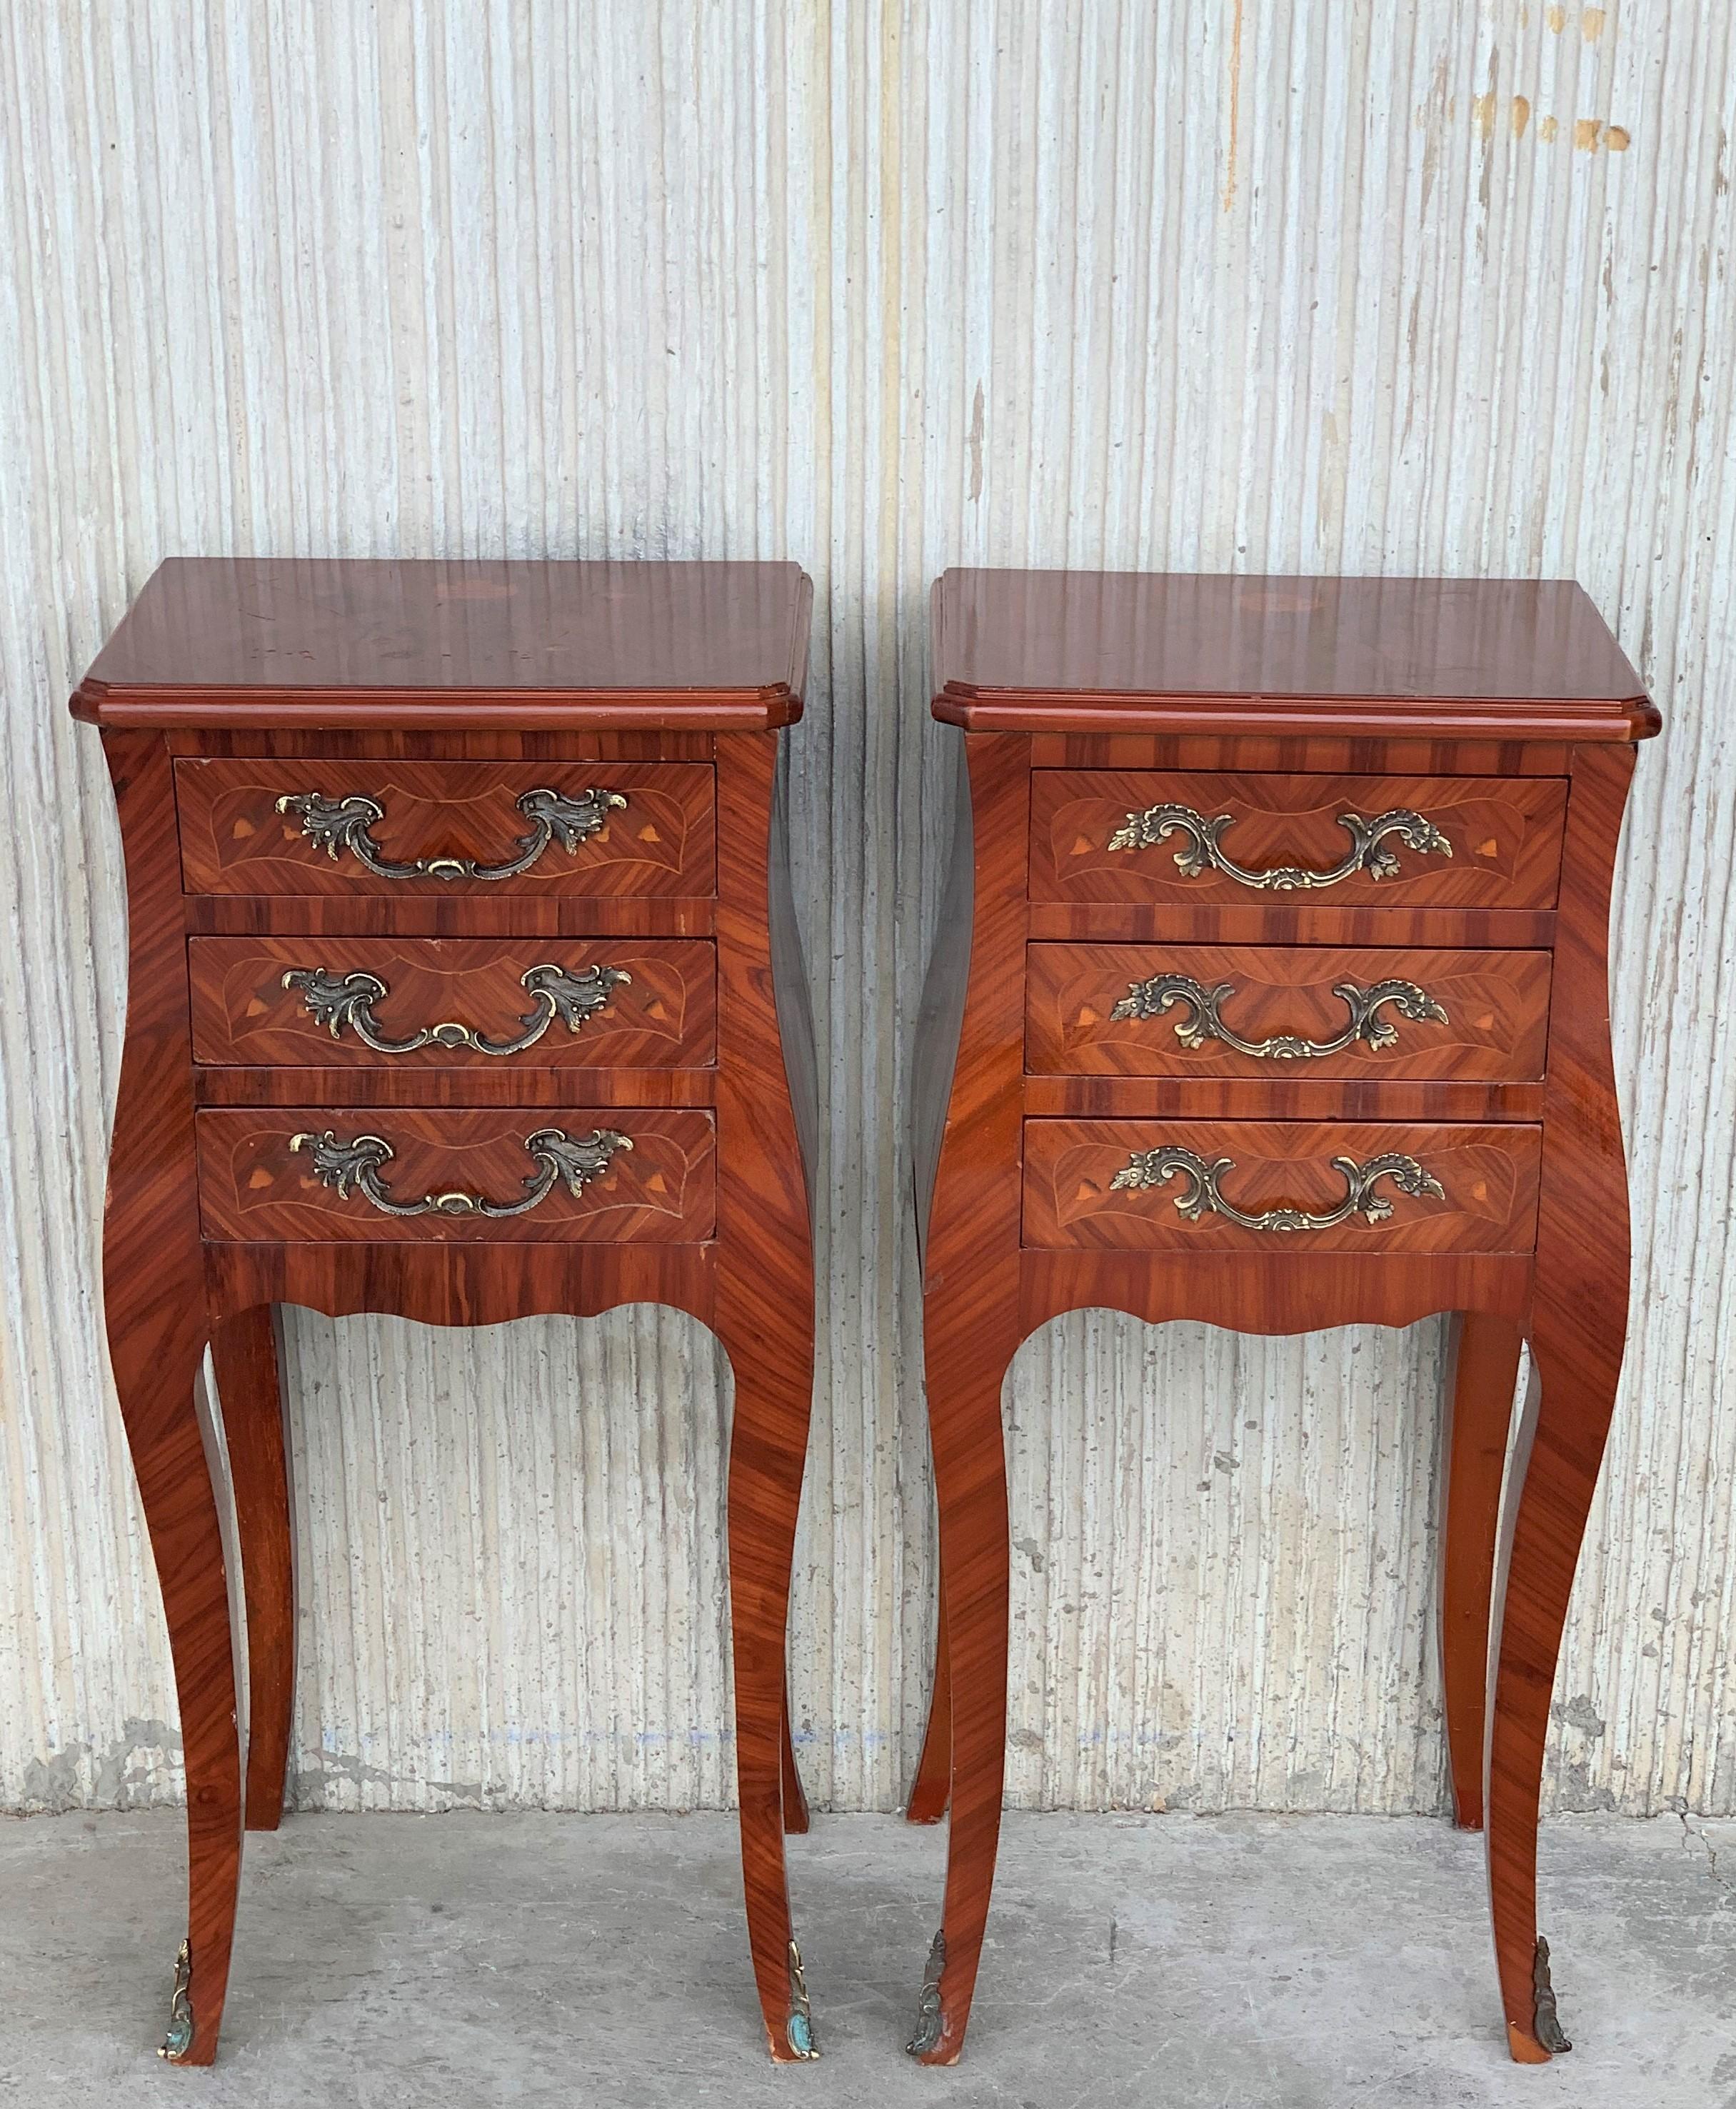 Chestnut Louis XV Style Pair of Marquetry Nightstands with Three Drawers & Cabriole Legs